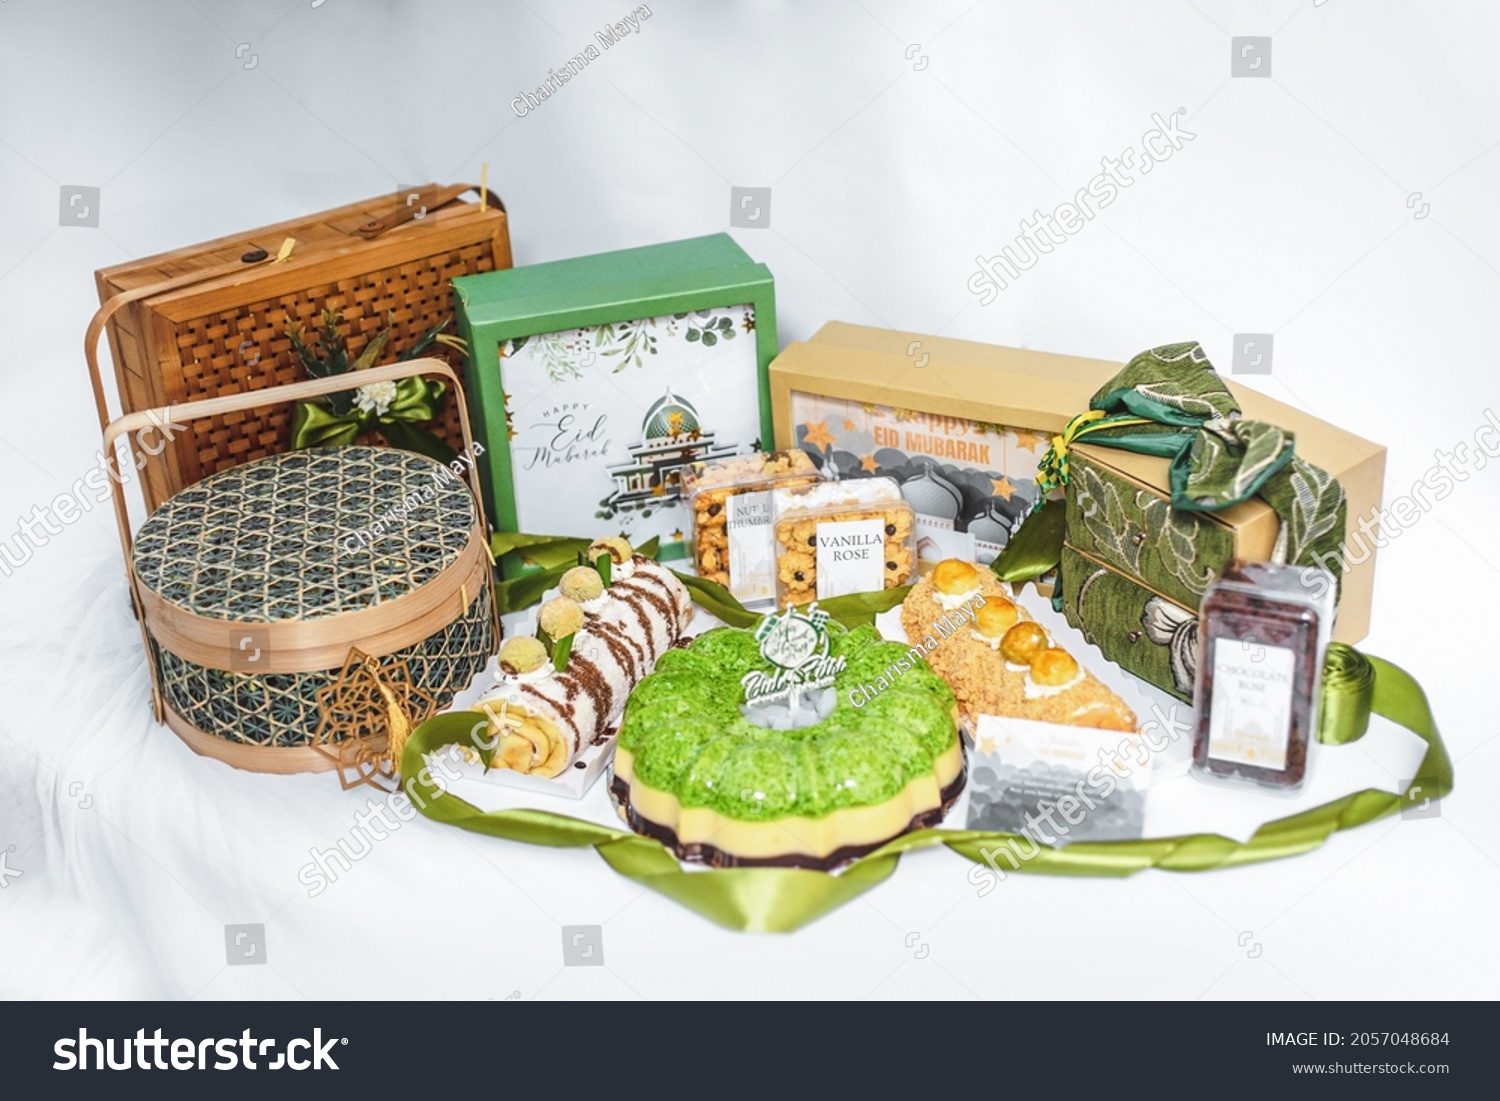 Ramadhan gift. Hampers moslem theme for celebrete the holy, can be bake snack, nastar, bakery, cookies, pudiing, chococips, roll cake, castangel, pandan. with greeting card and accsories. #2057048684